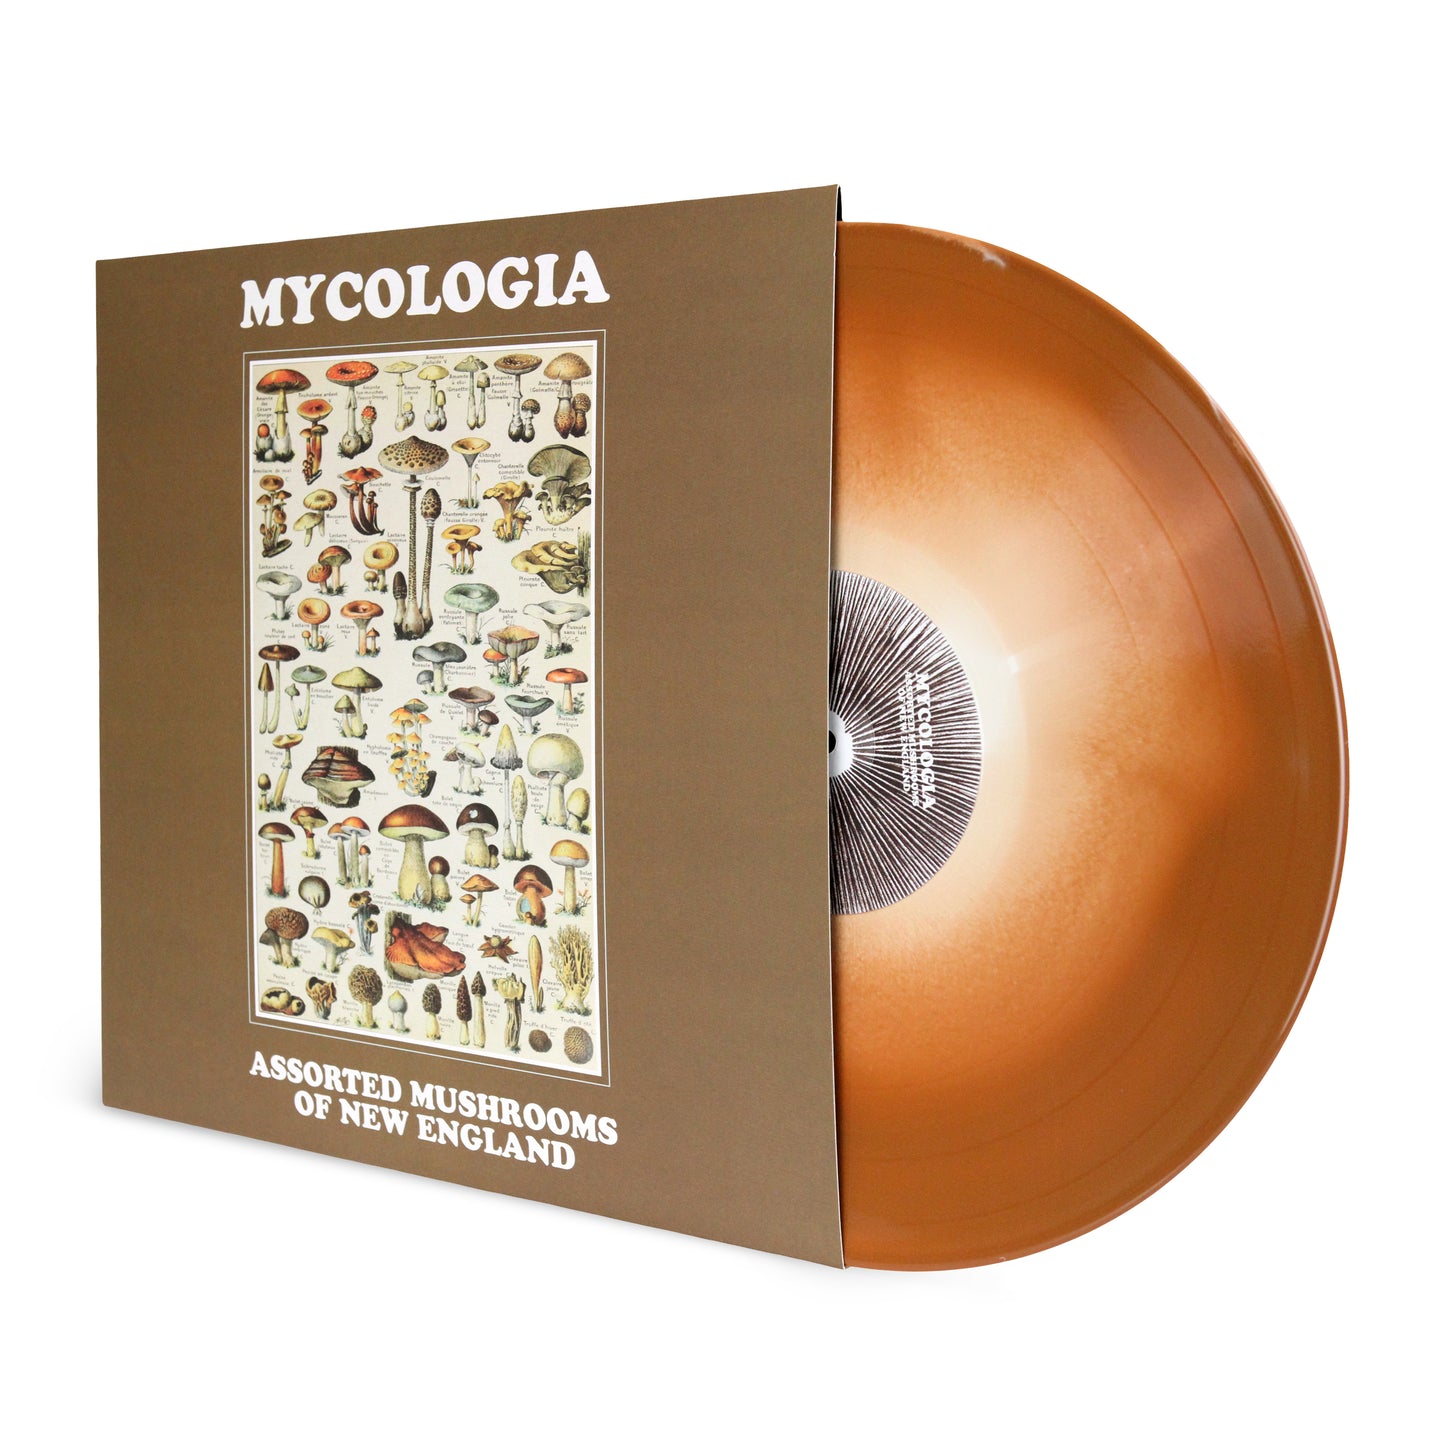 MYCOLOGIA - Assorted Mushrooms of New England LP